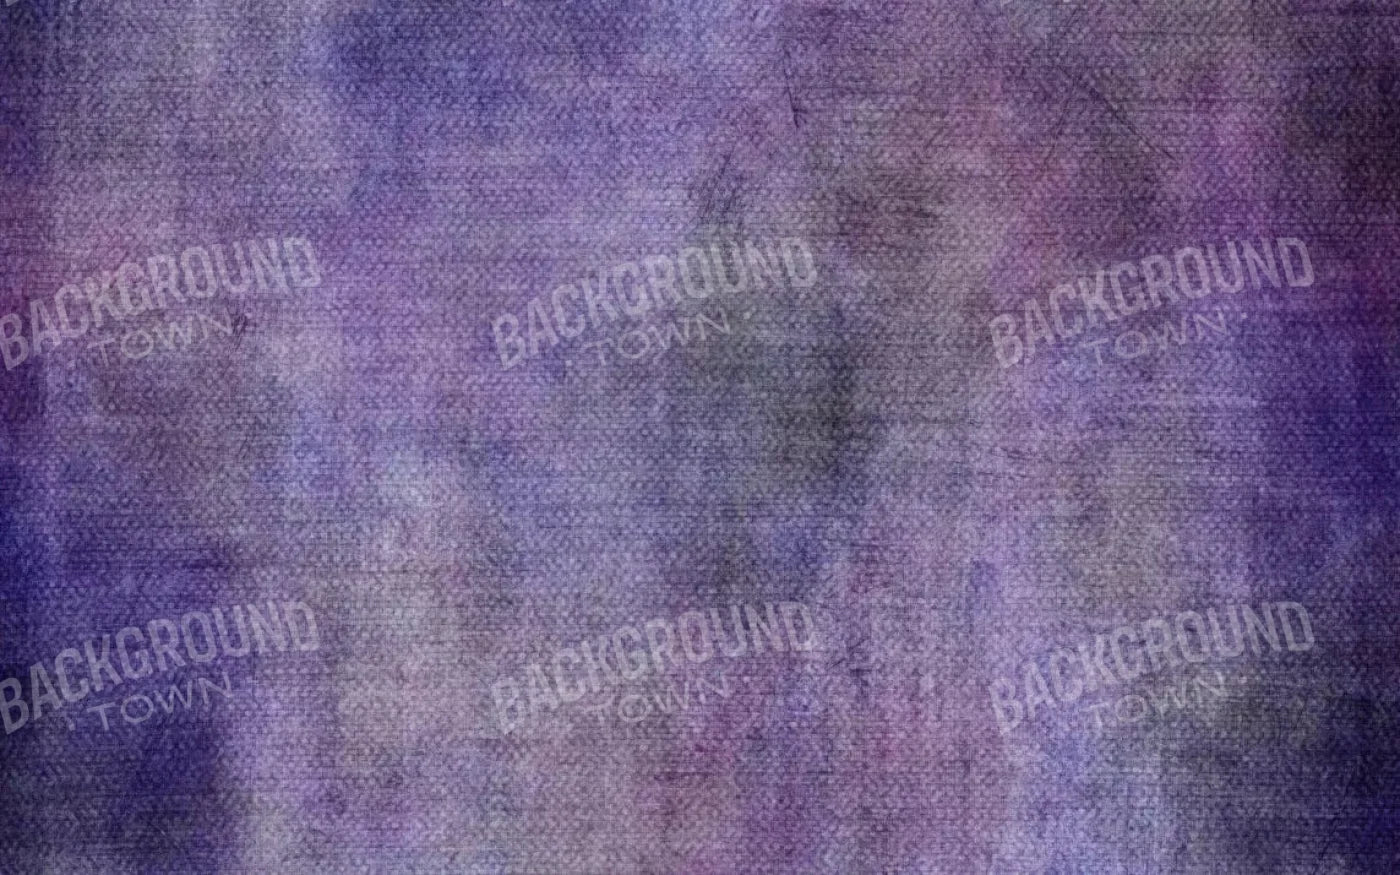 Berrymore 14X9 Ultracloth ( 168 X 108 Inch ) Backdrop